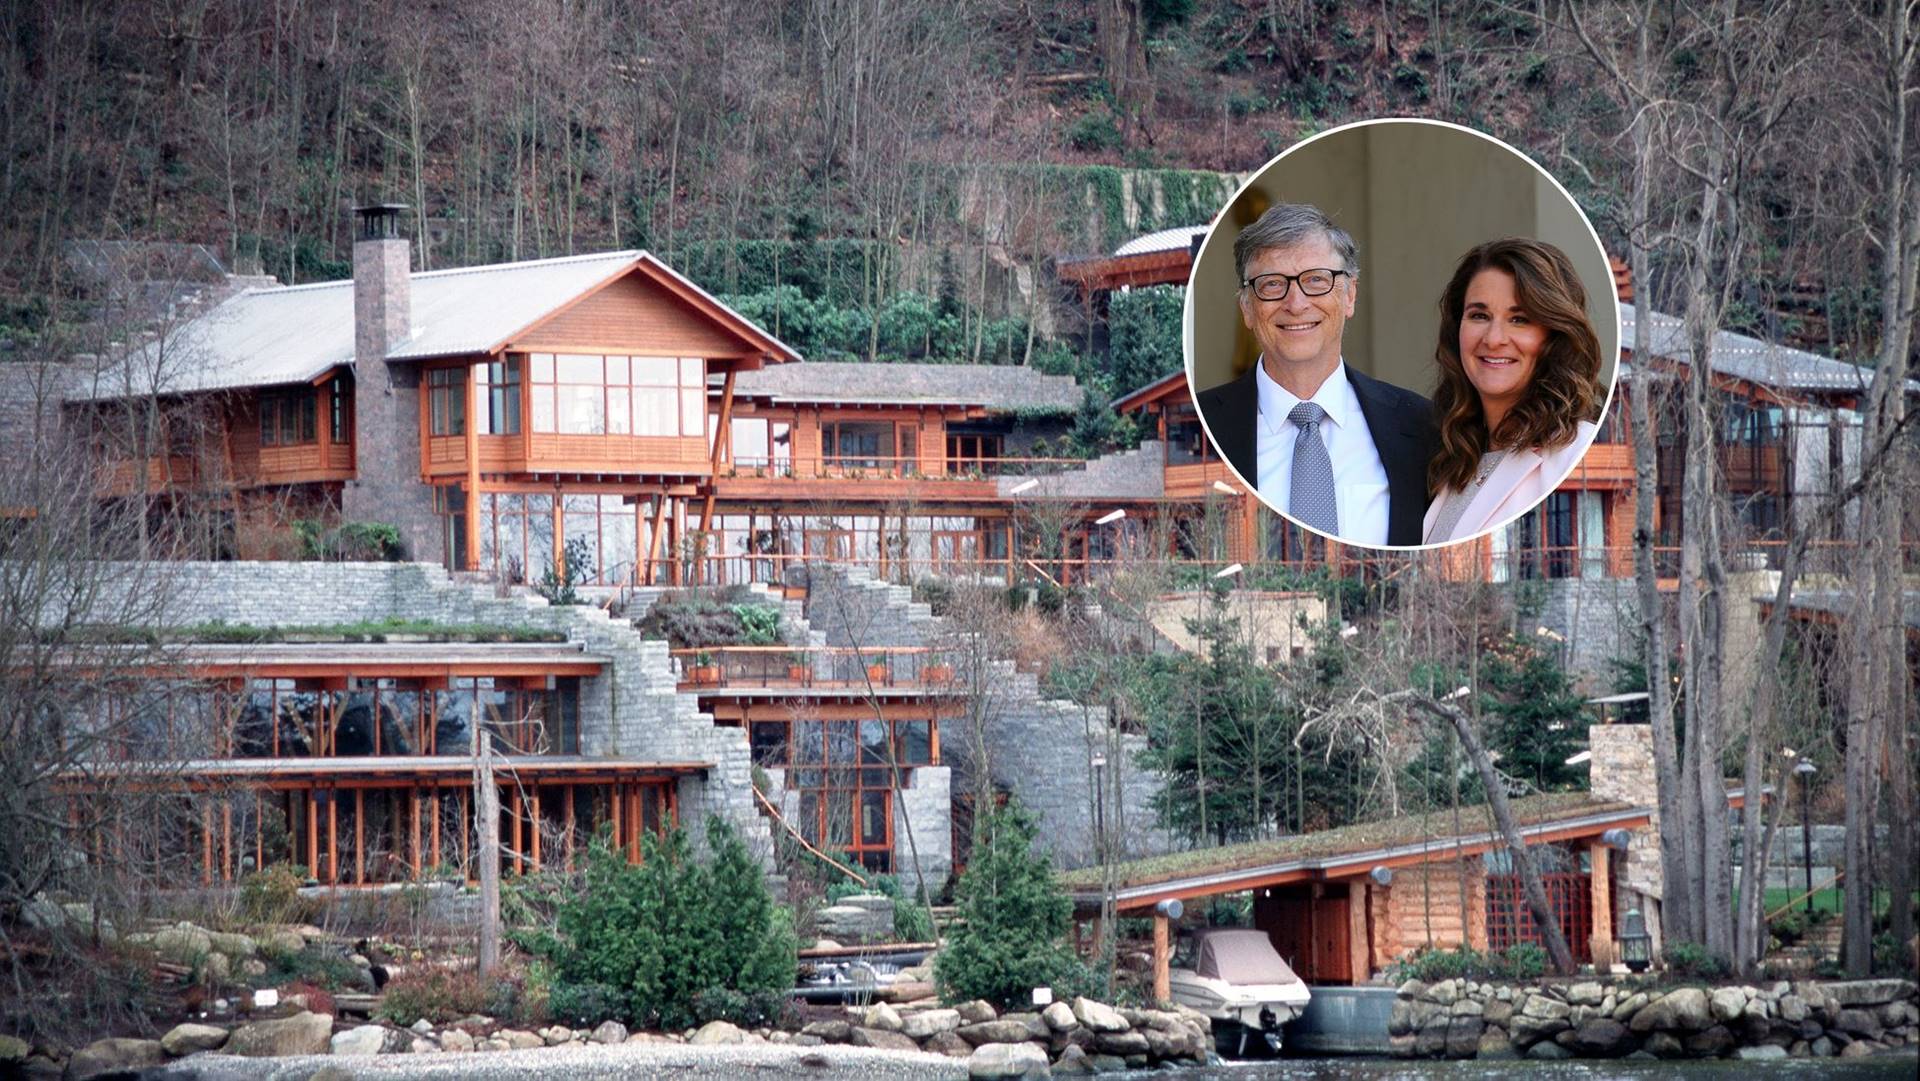 The Opulent, Futuristic Megamansion of Bill and Melinda Gates Could Be a Hard Sell